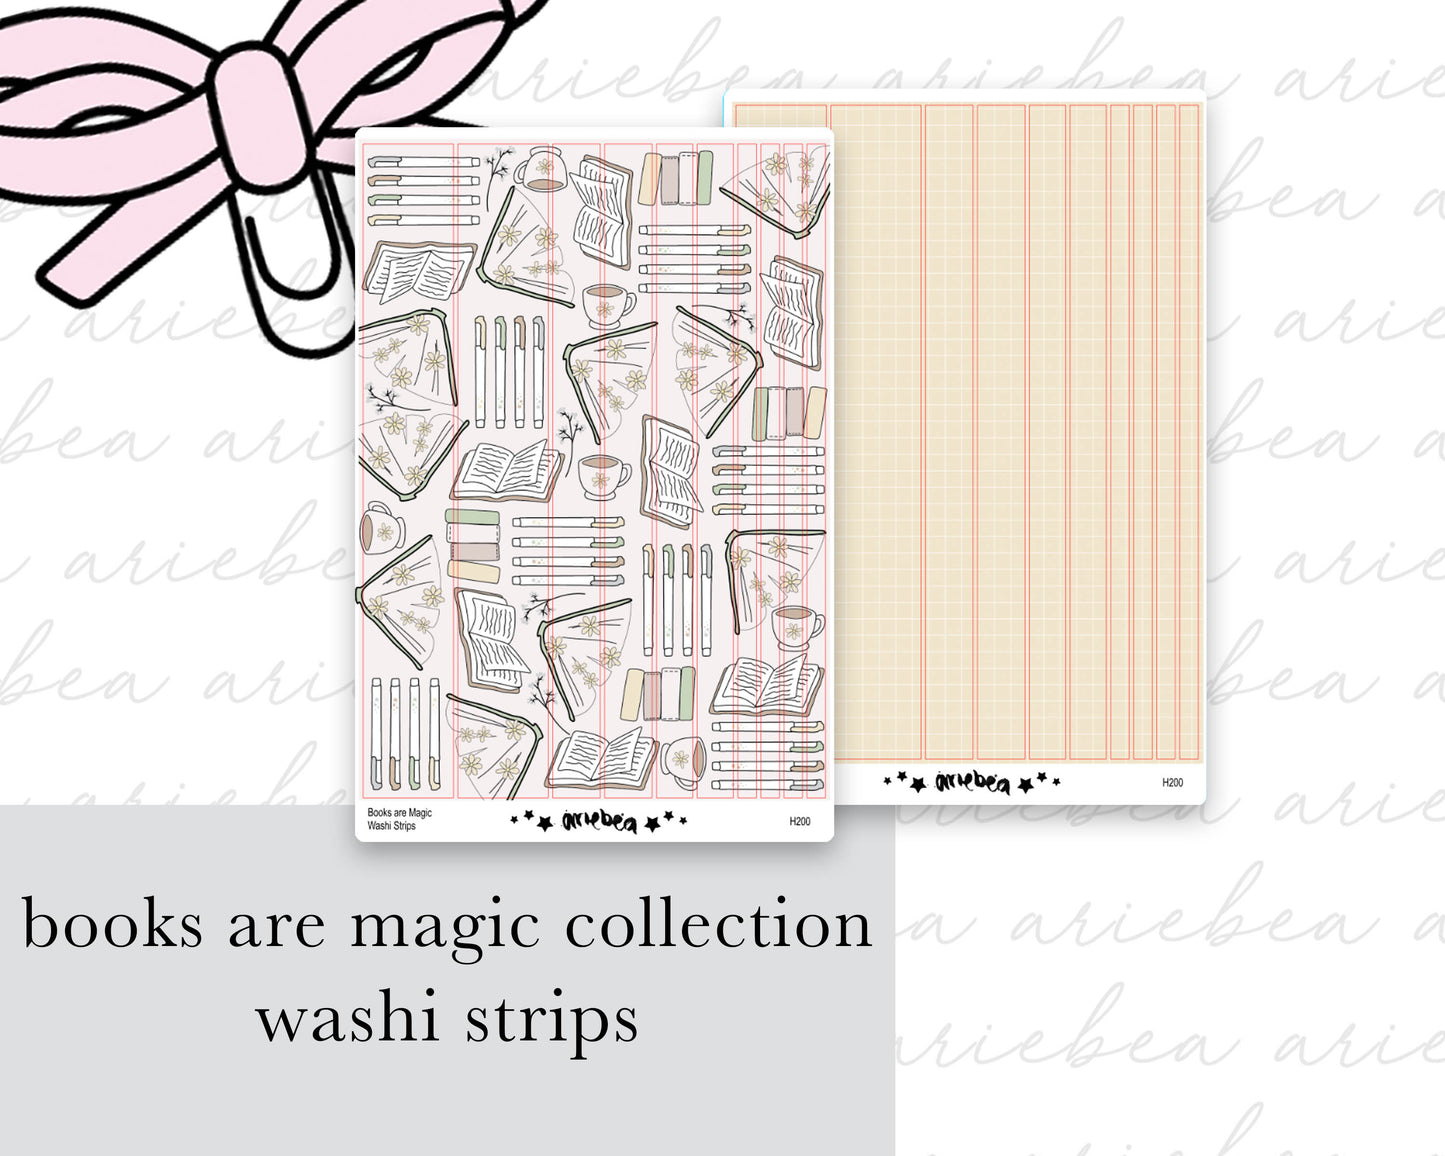 Books Are Magic Collection Washi Strips